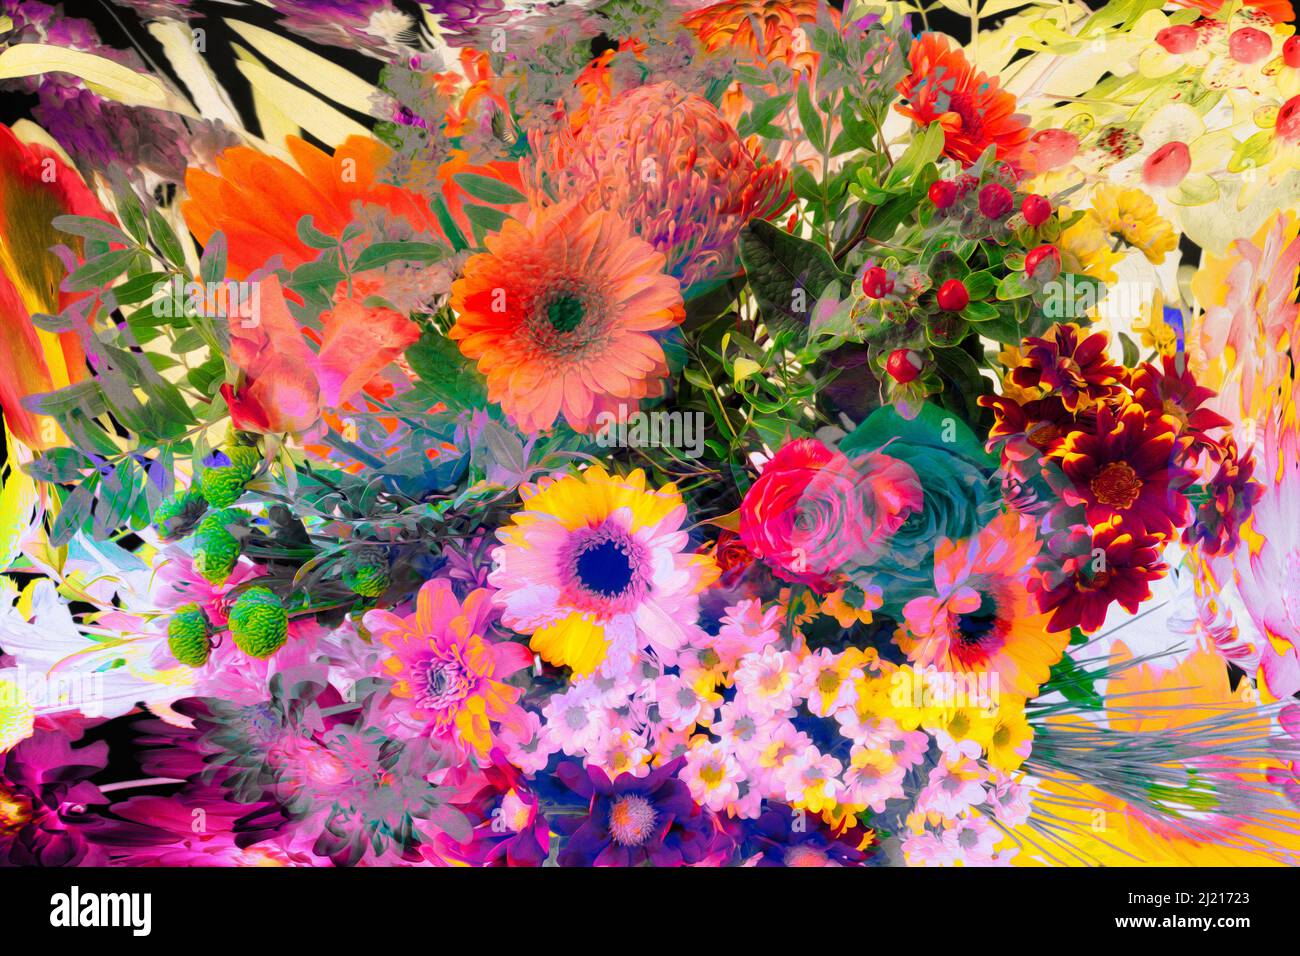 FLORAL ART: Bunch of Spring Flowers  (HDR-Image) Stock Photo